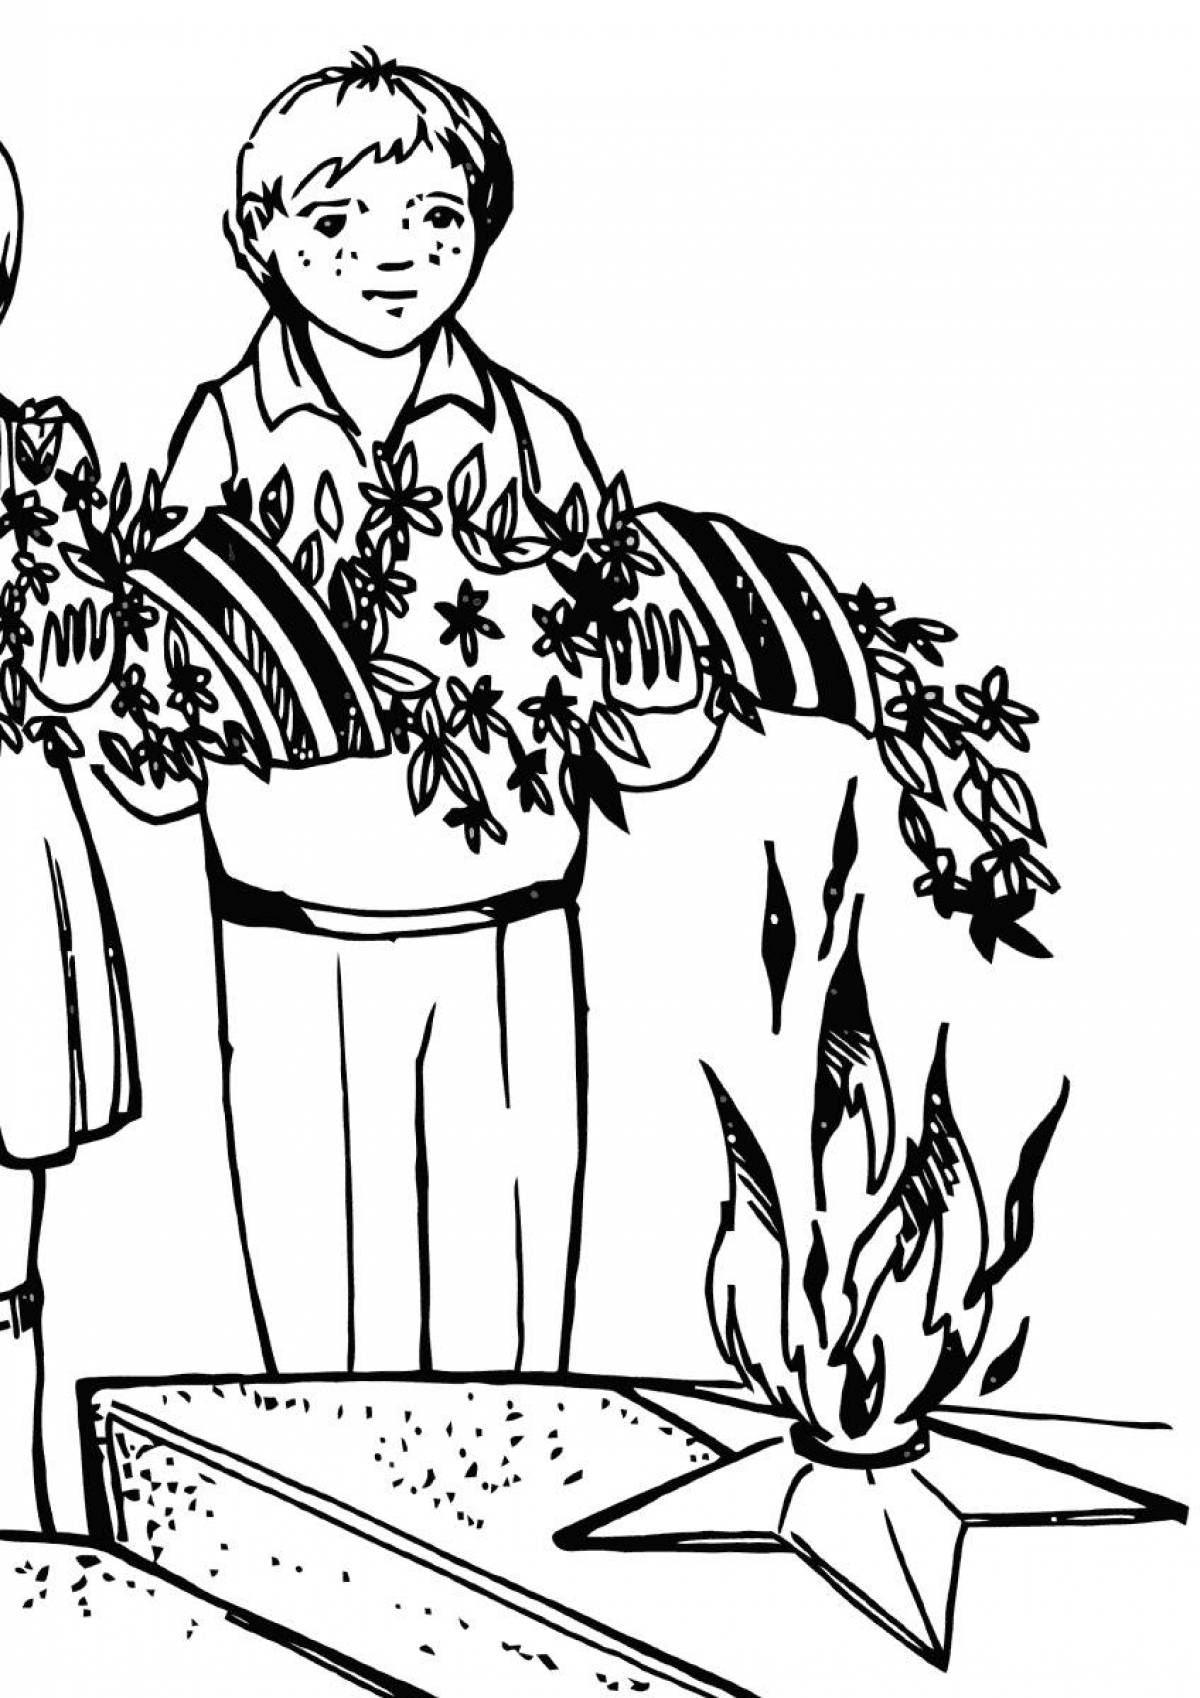 Coloring page flickering eternal flame